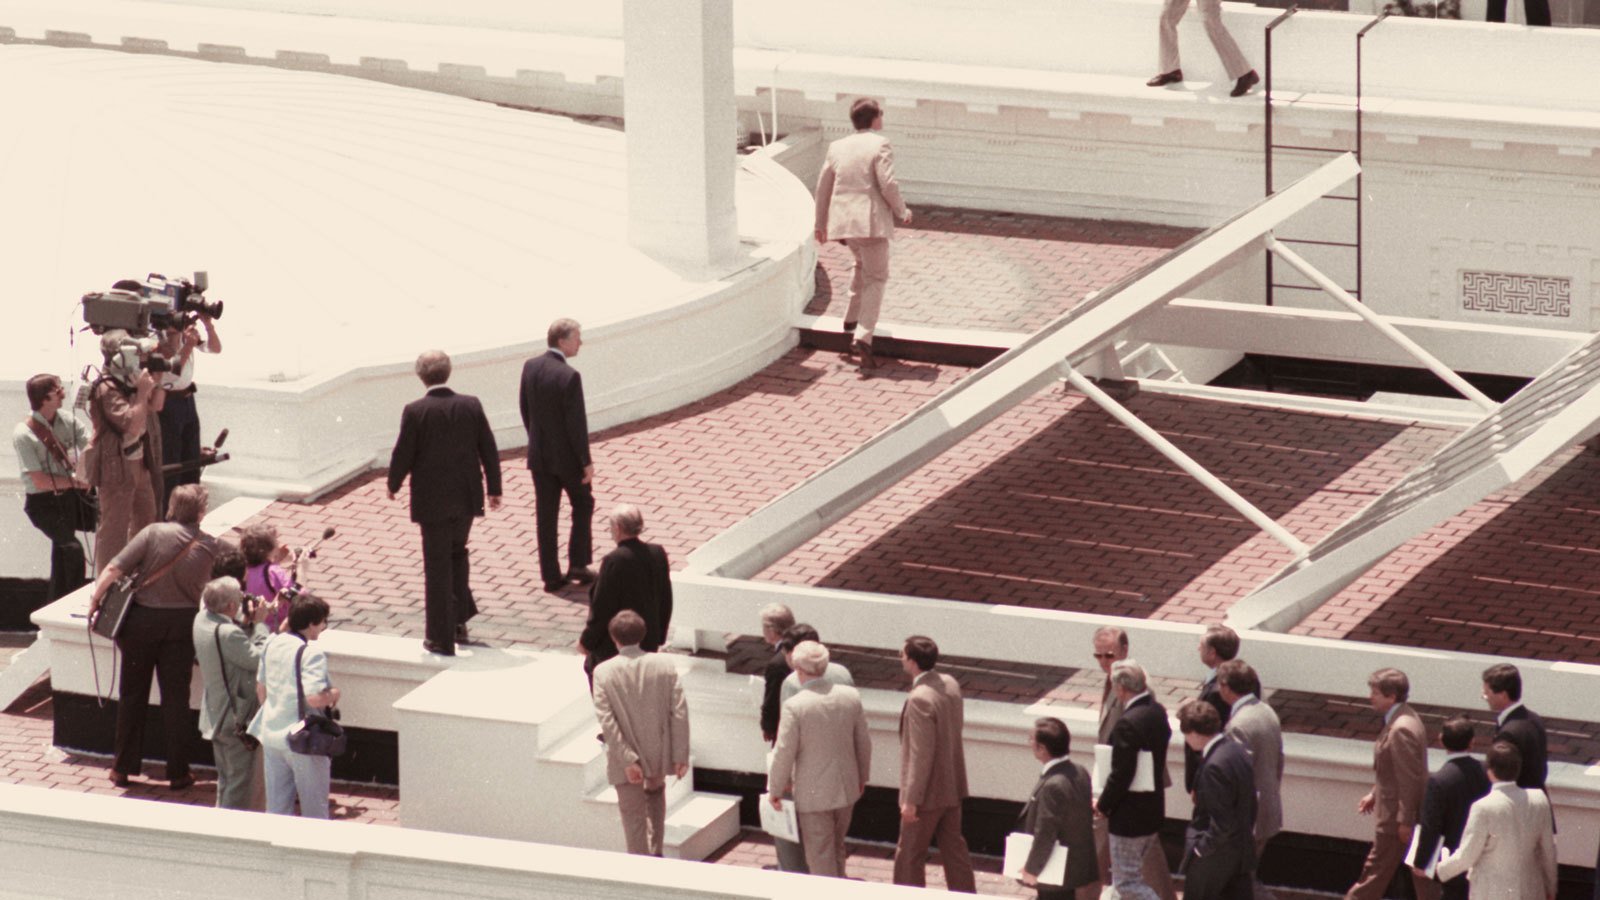 Roman Keller and Christina Hemauer, A Road Not Taken. The Story of the Jimmy Carter White House Solar Installation, 2010, film still. Courtesy of the artists.